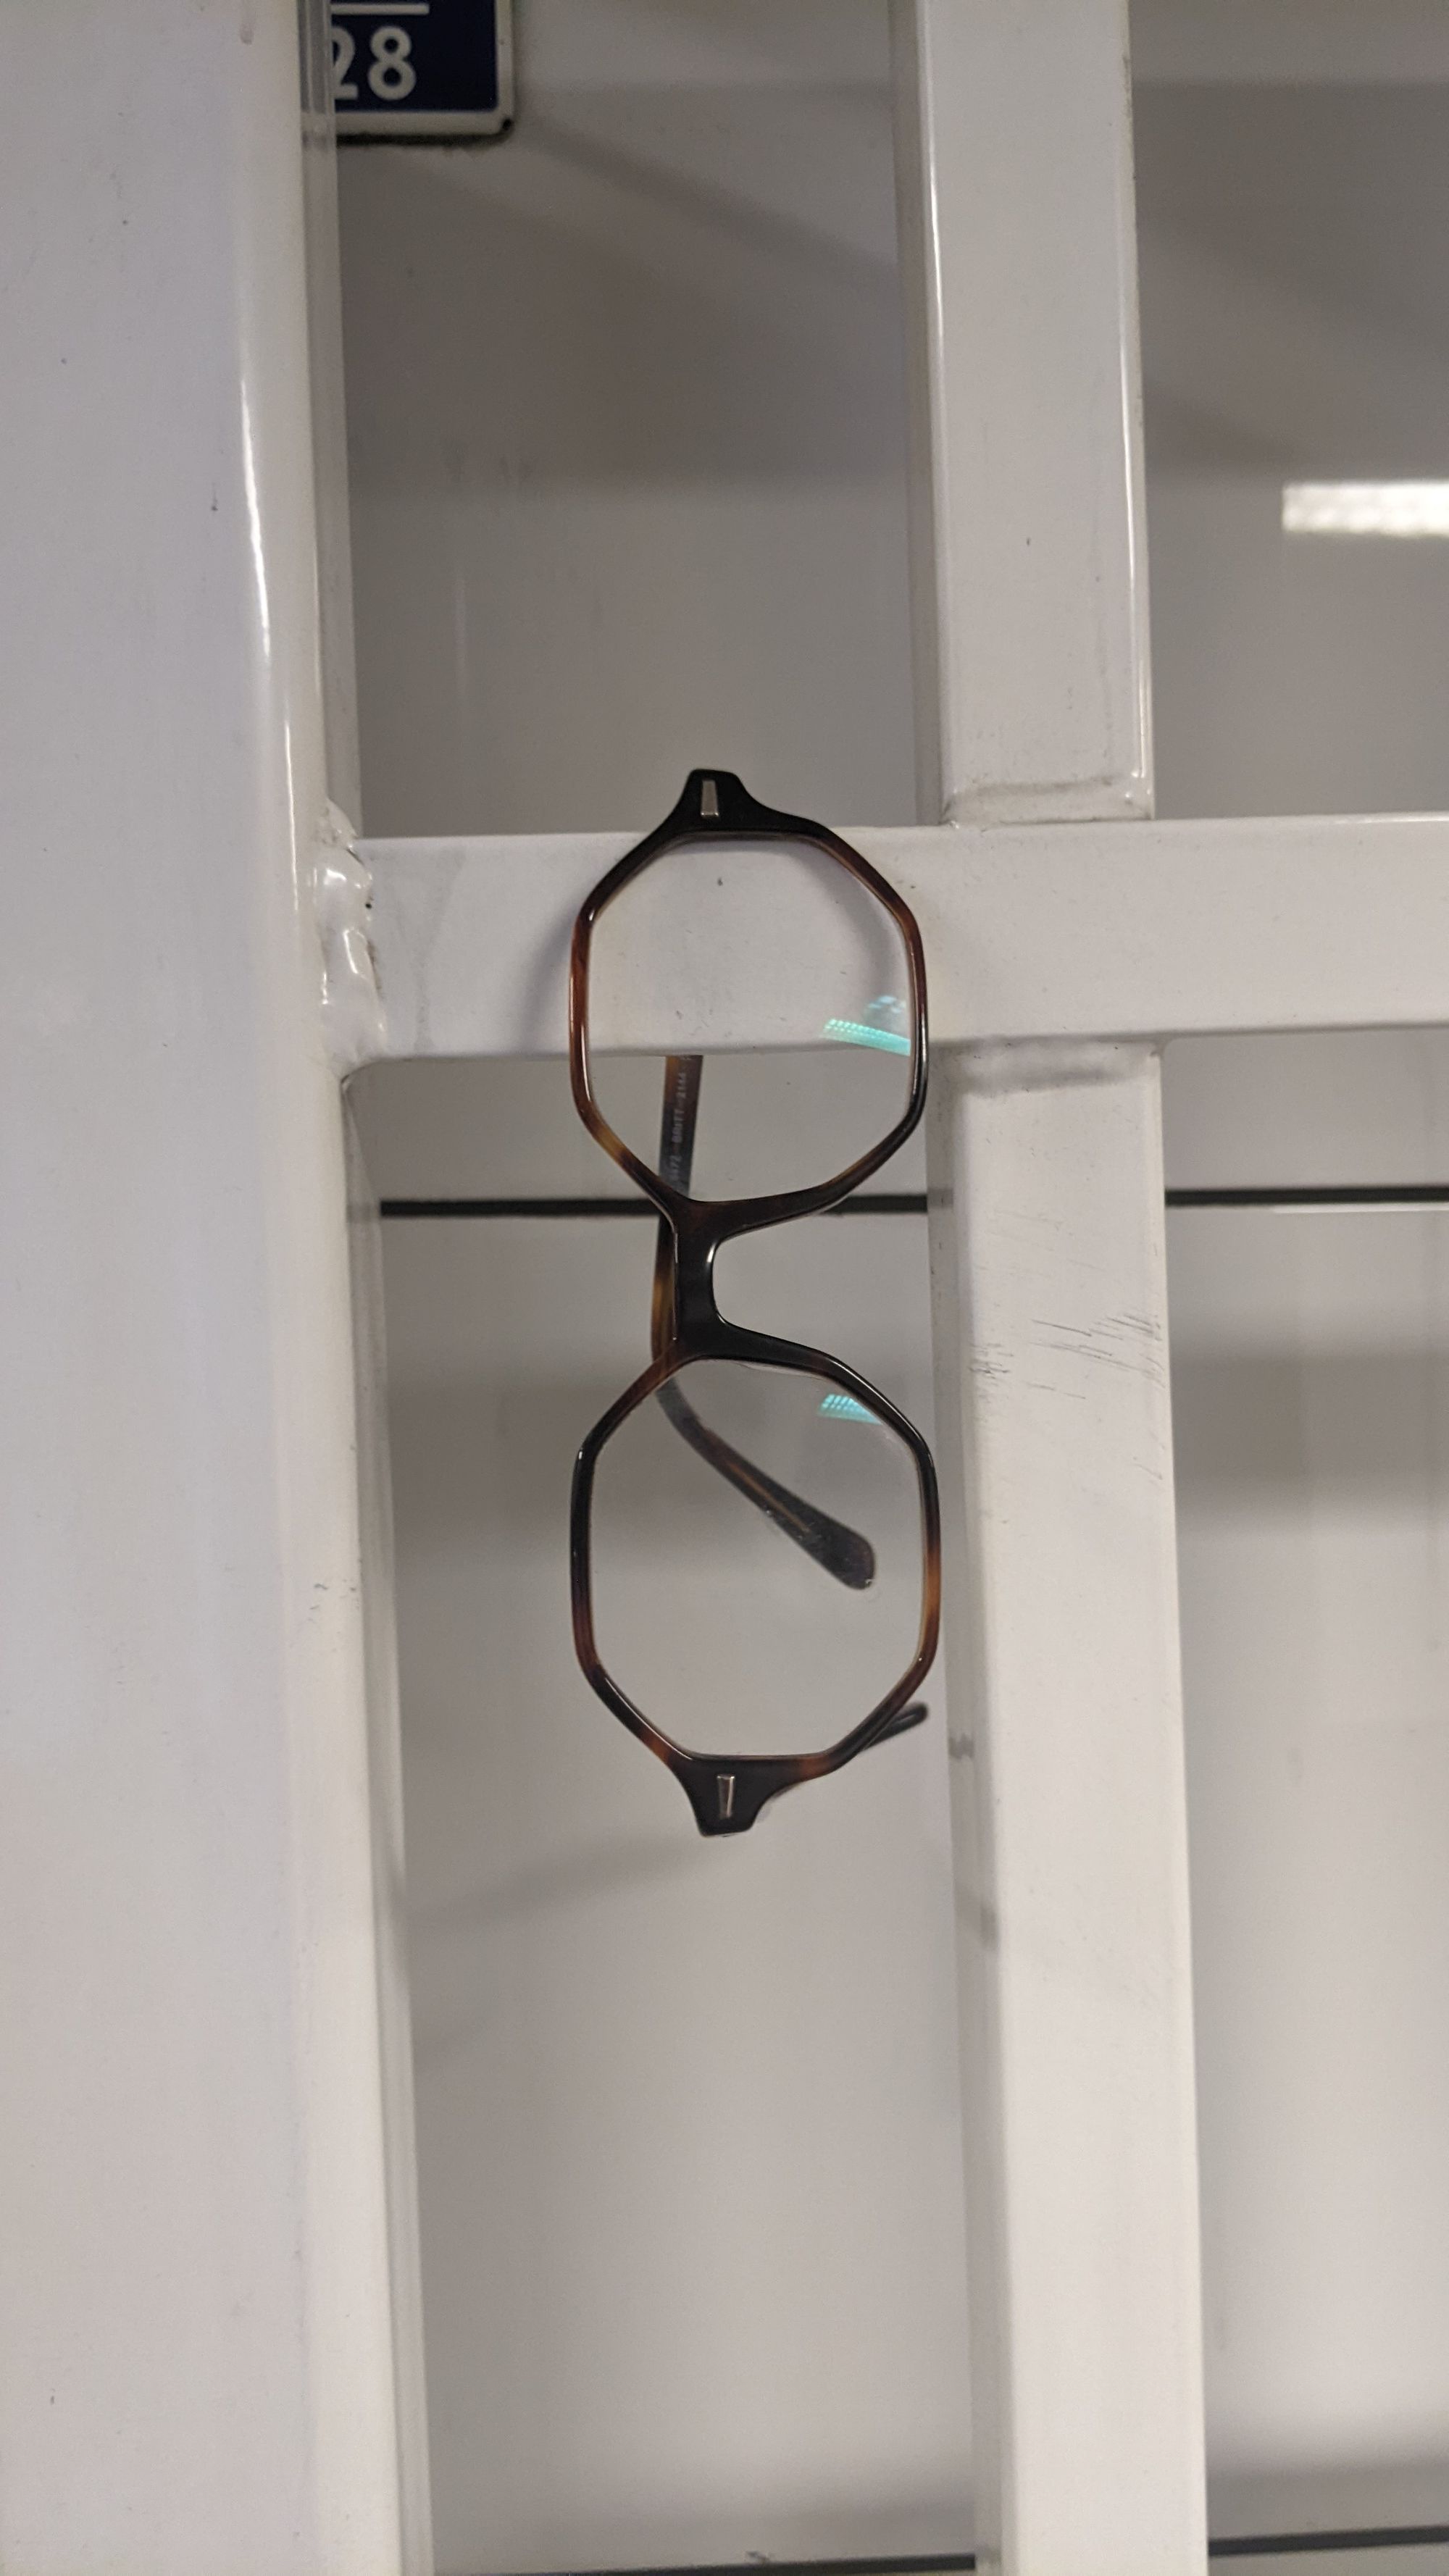 Picture of glasses hanging from a railing